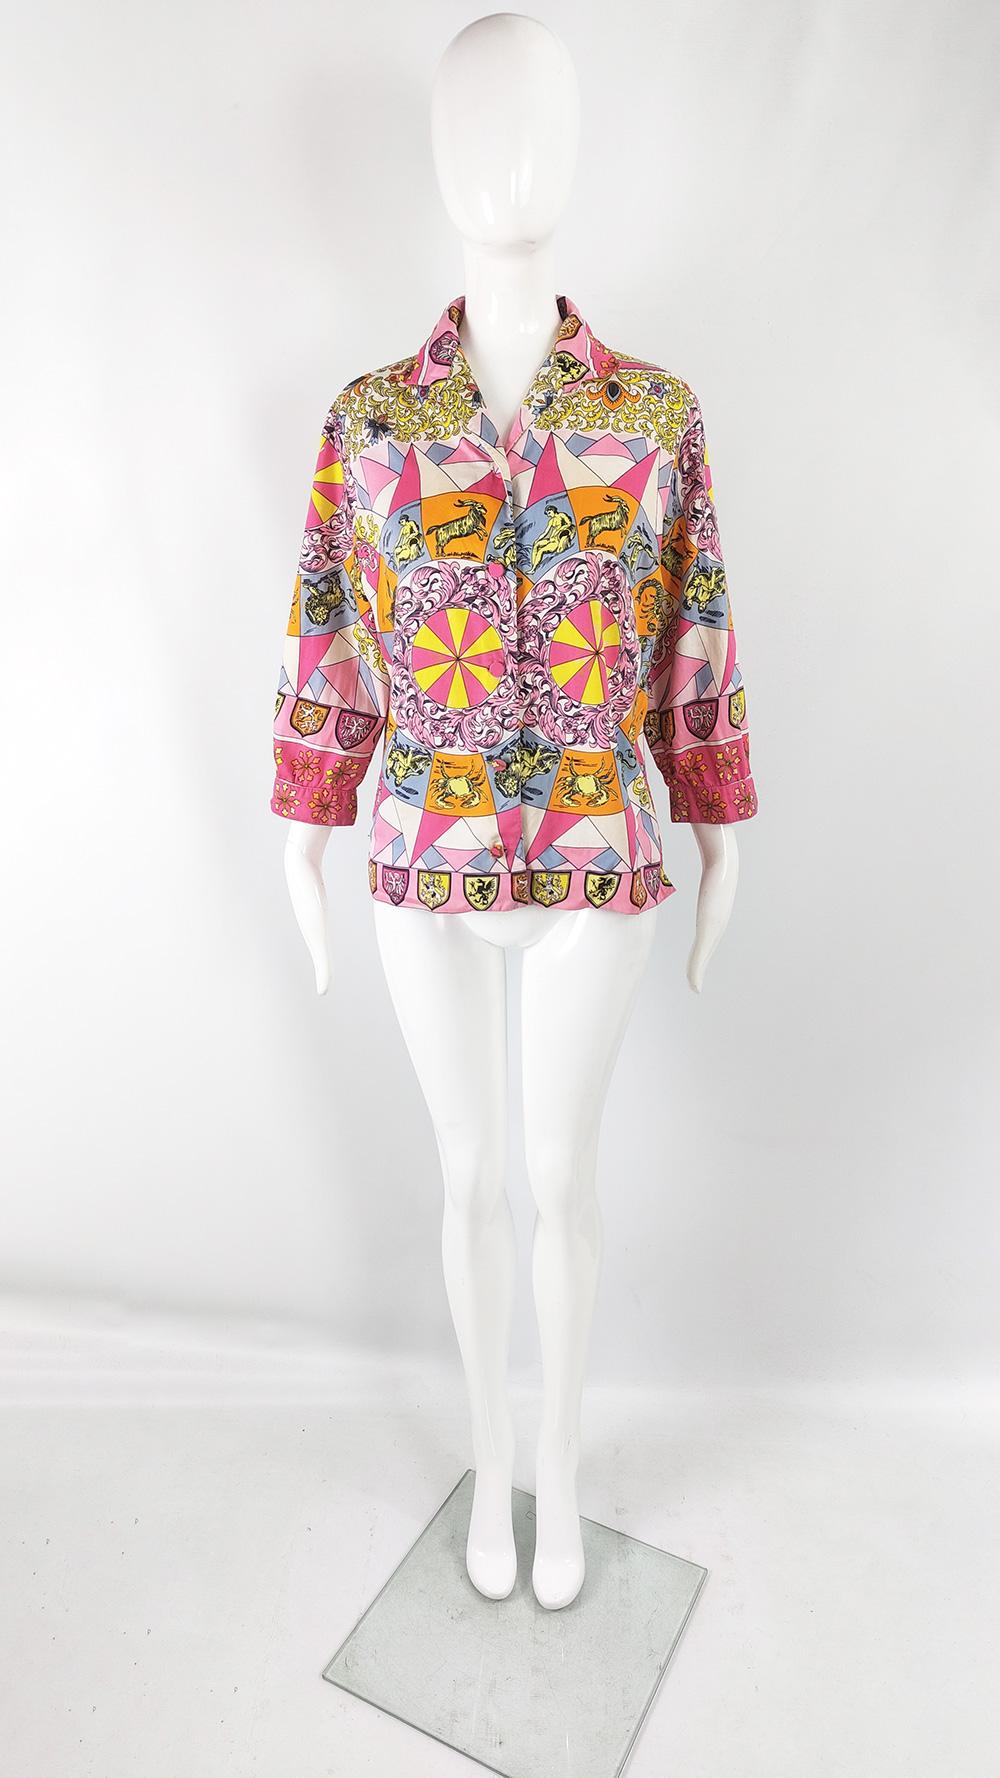 A stunning vintage womens blouse from the 60s by quality British label, Alan Lee. Made from a boldly patterned rayon fabric with a horoscope print throughout.

Size: Unlabelled; measures roughly like a modern womens Medium to Large, meant to have a